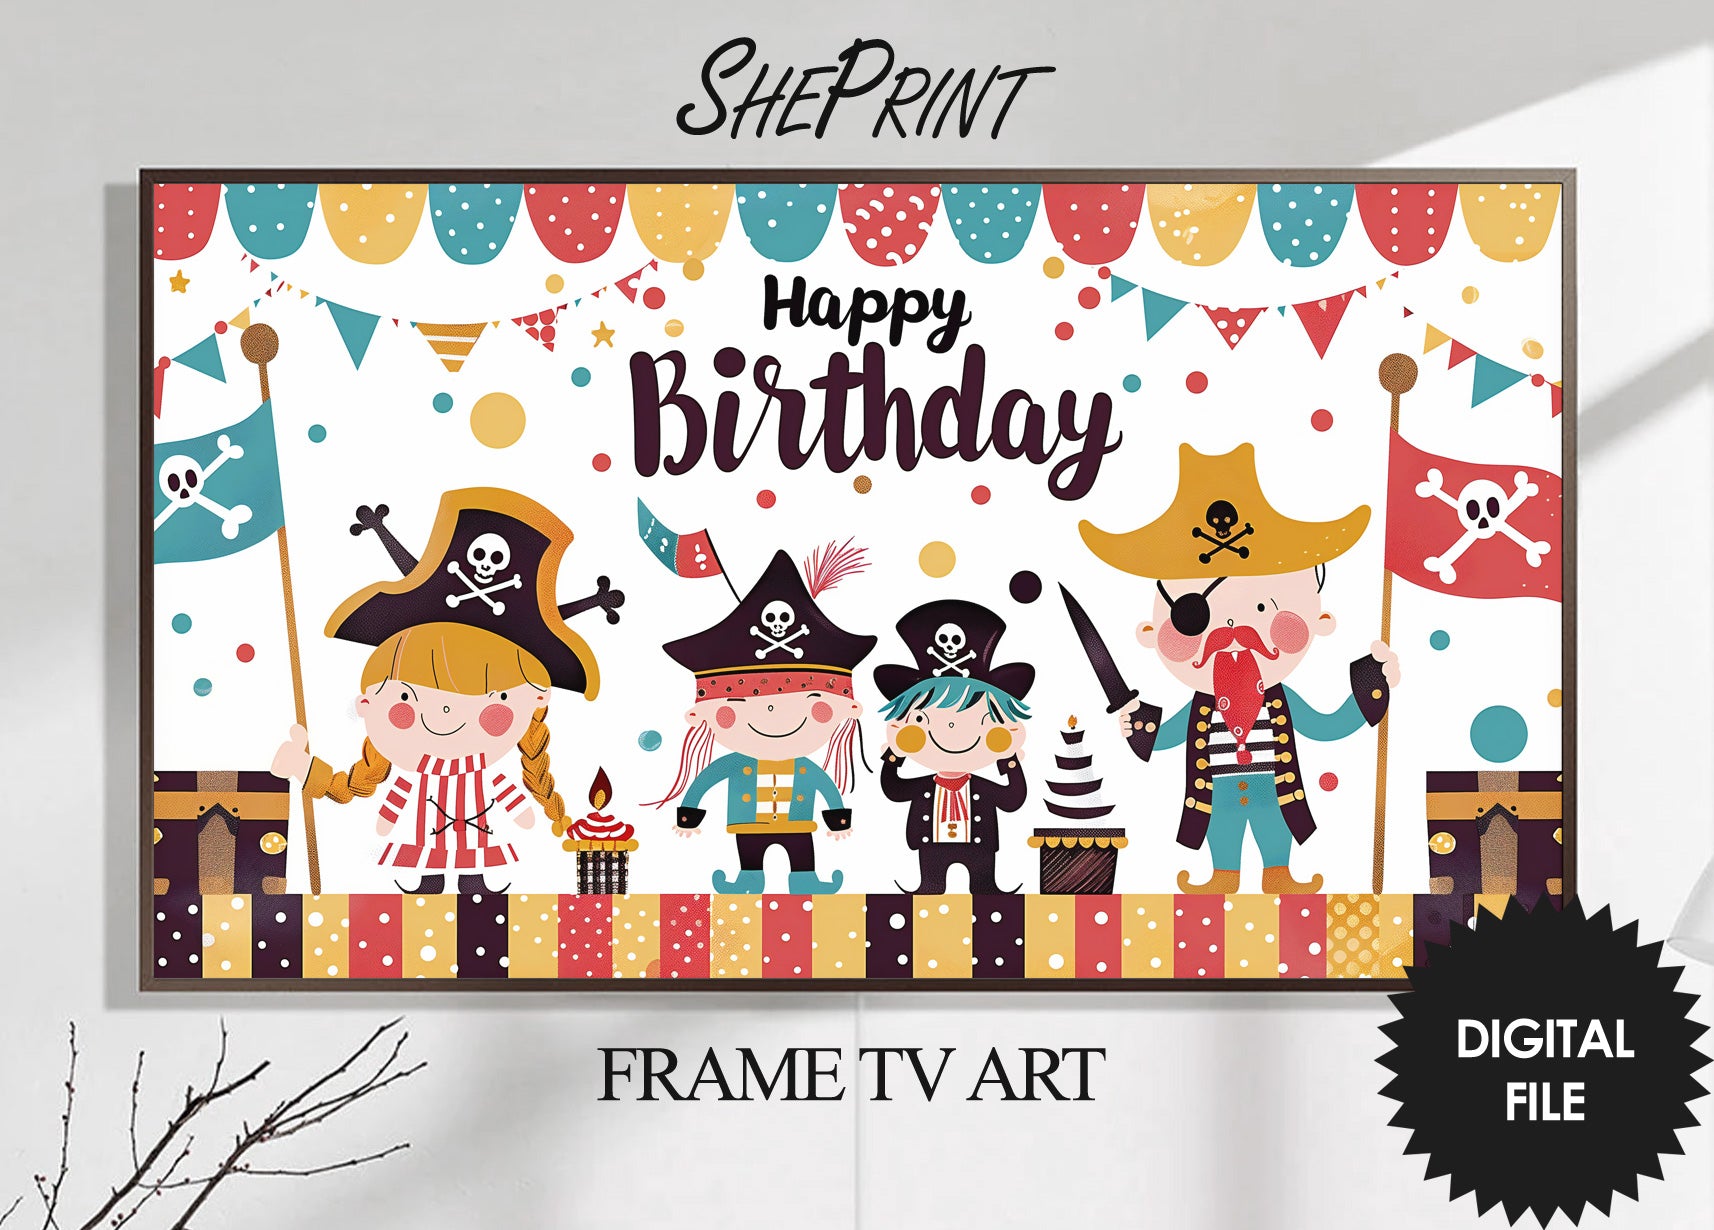 Frame TV Art For Kids | Happy Birthday Pirate Themed Party preview on Samsung Frame TV